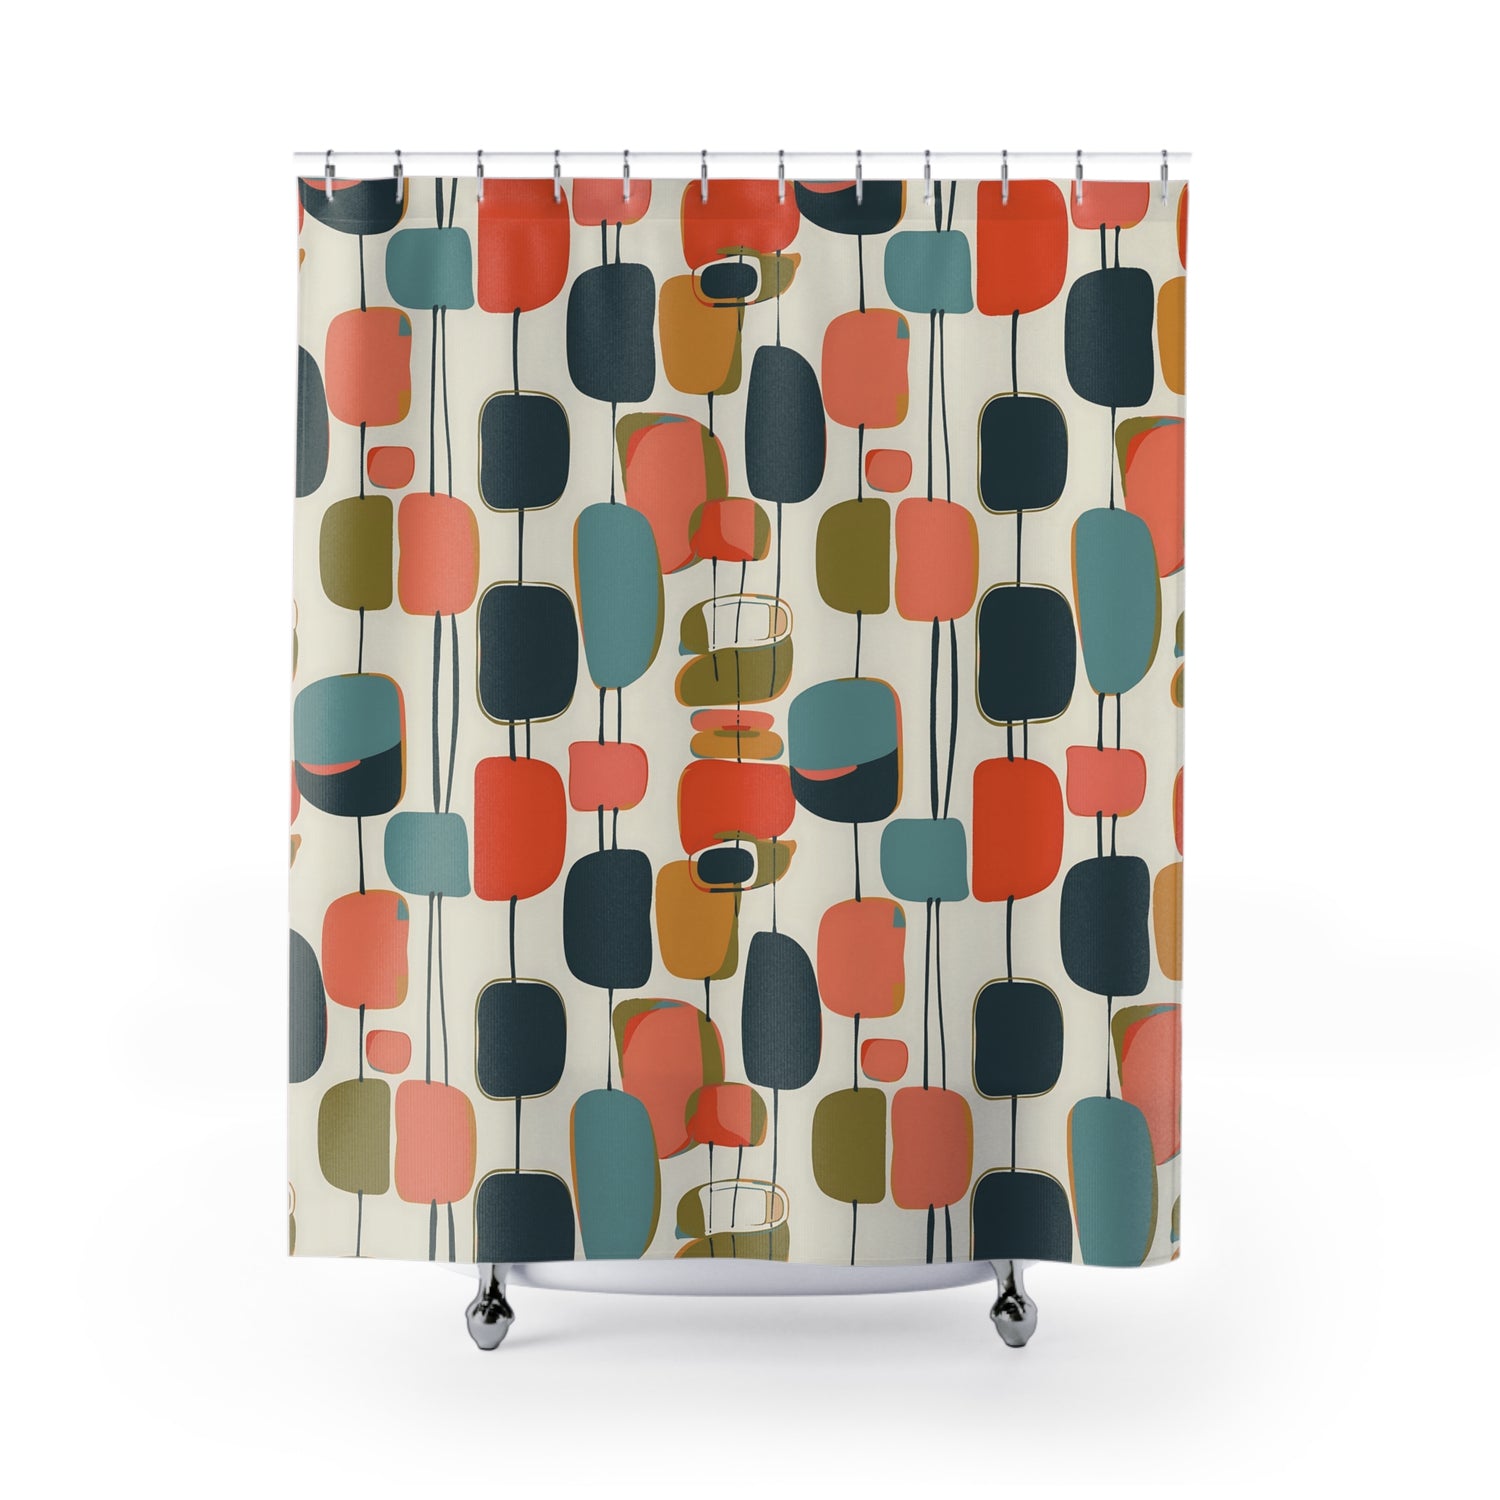 Mid Century Modern Shower Curtain, Abstracts, Geometric, MCM Teal, Orange, Aqua, Navy Blue Colorful Design Shower Curtain